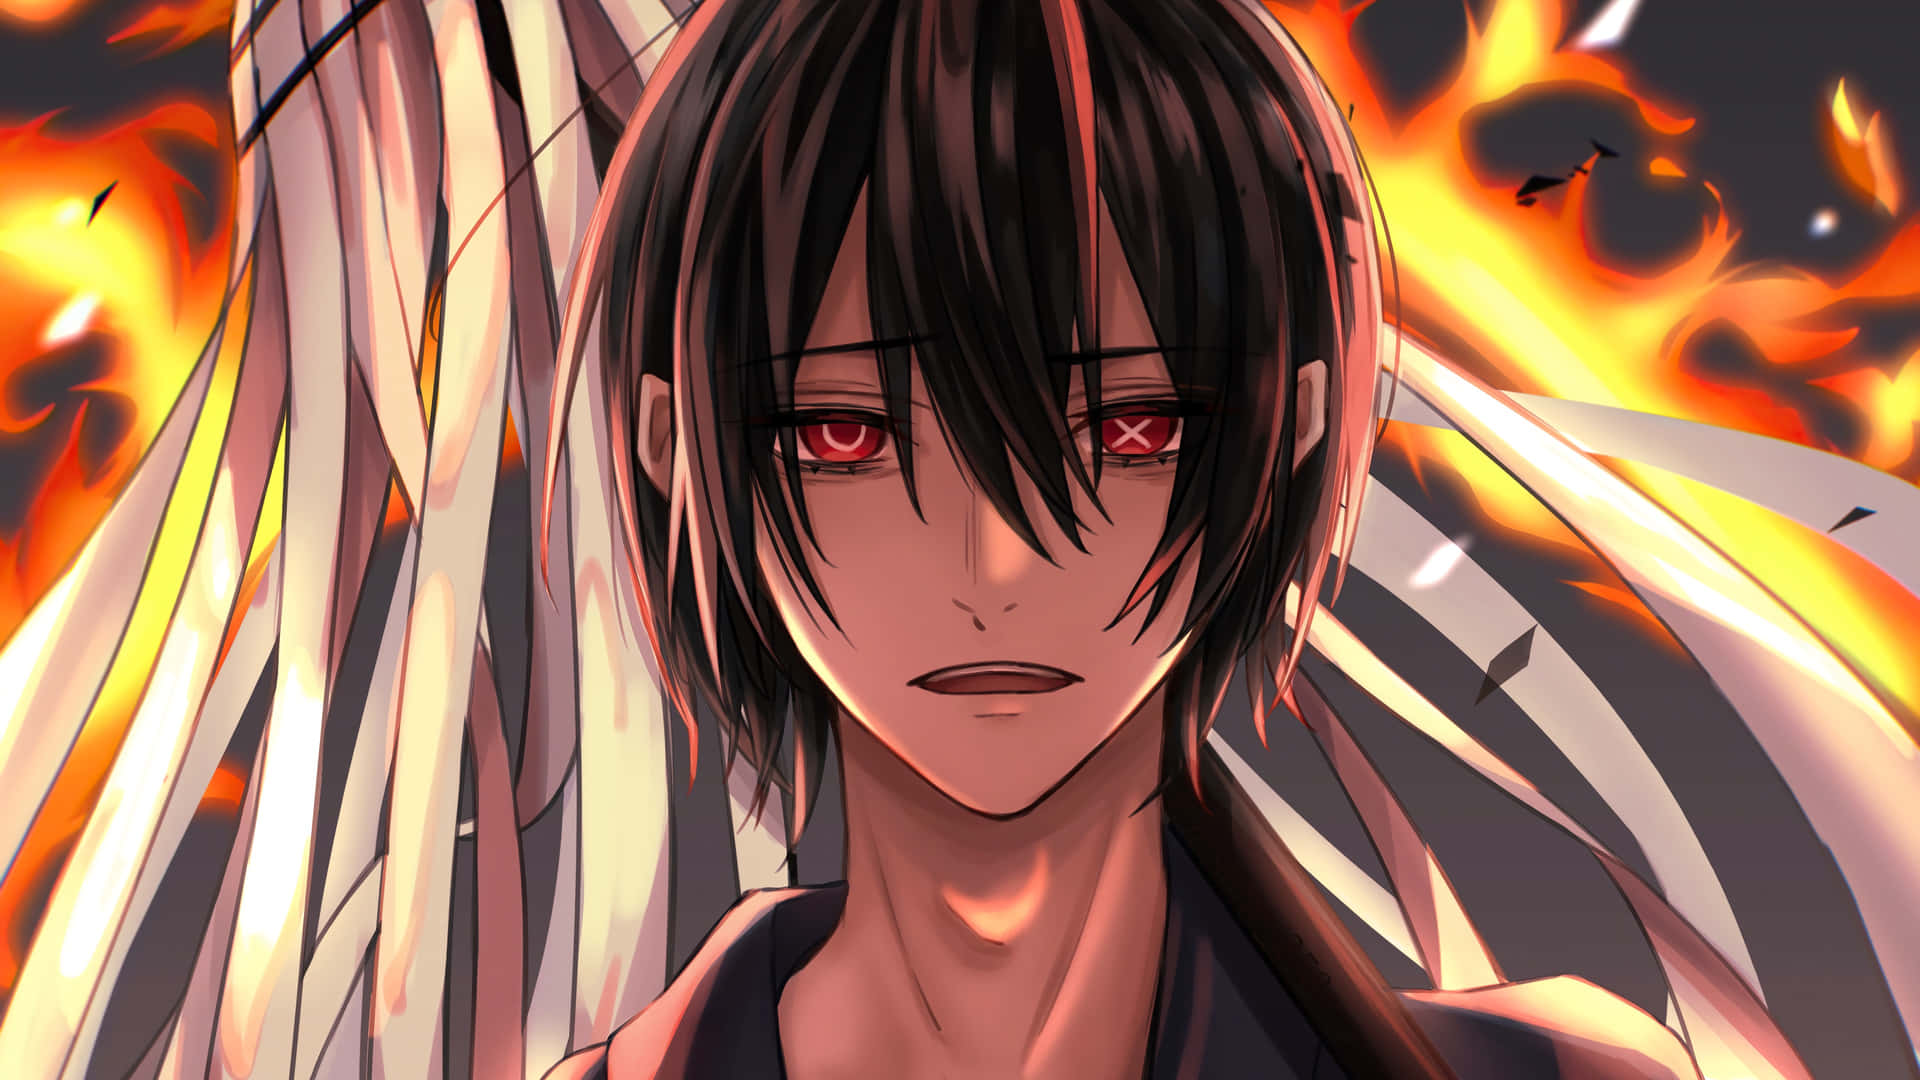 Anime Boy Mouth Open With Fire Wallpaper